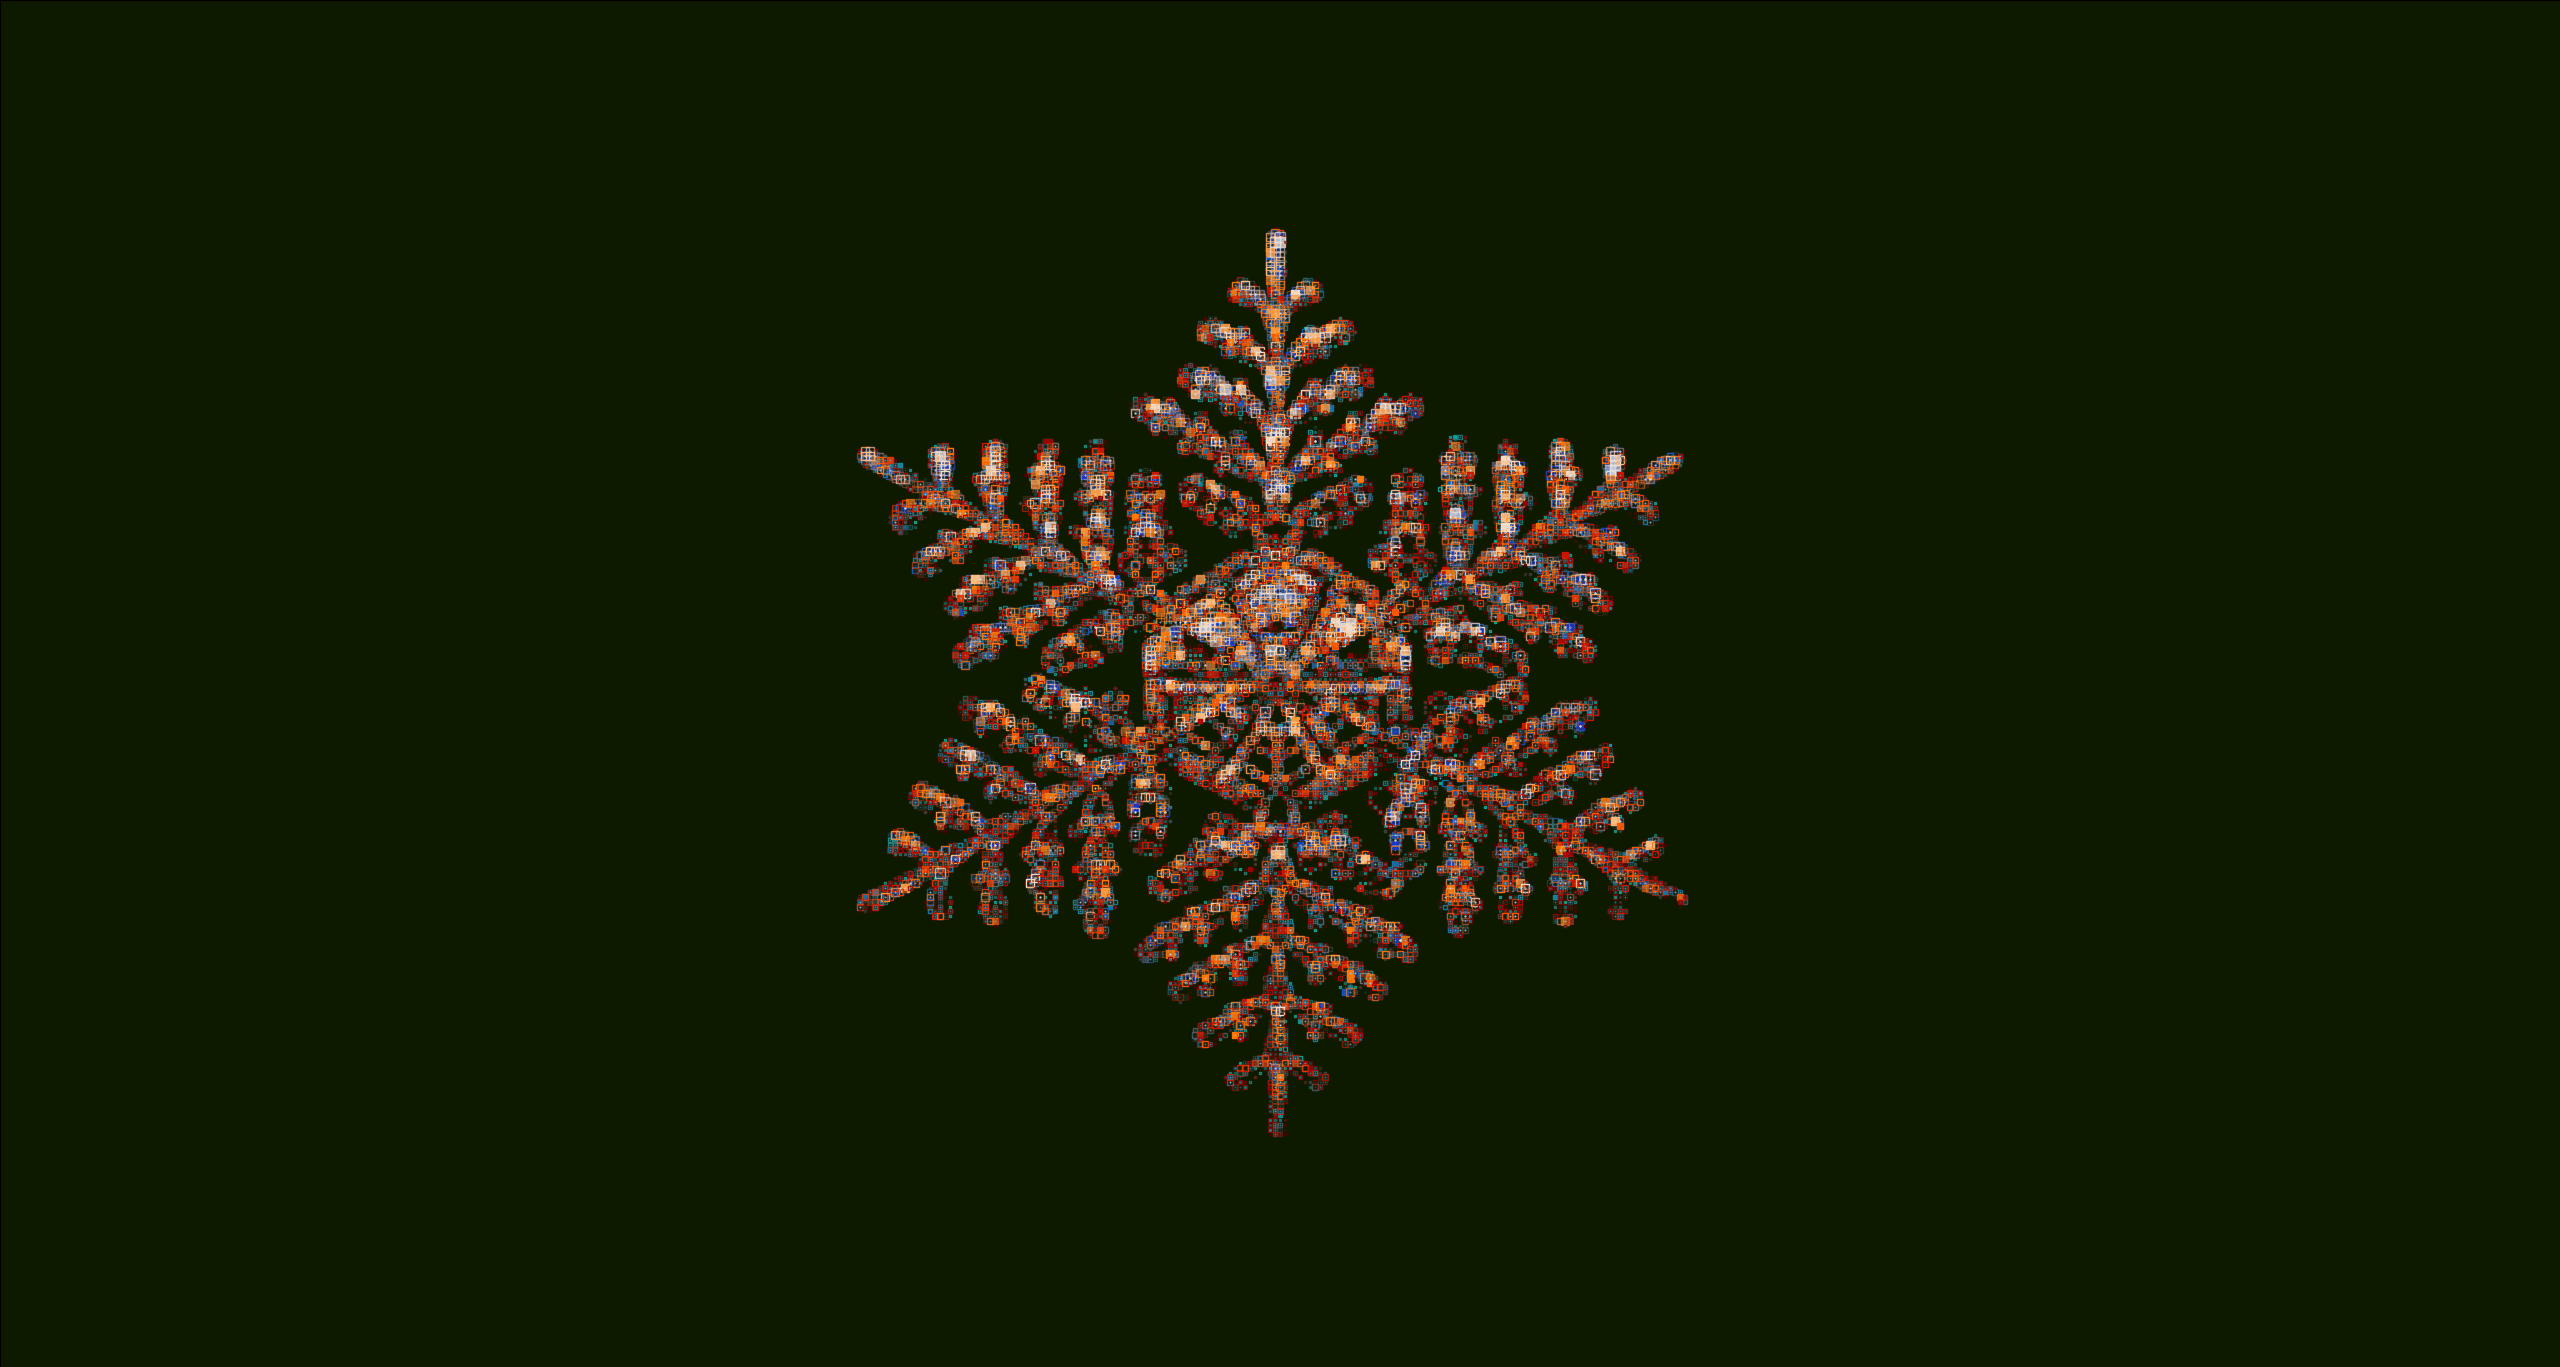 Snowflake 4K wallpaper for your desktop or mobile screen free and easy to download